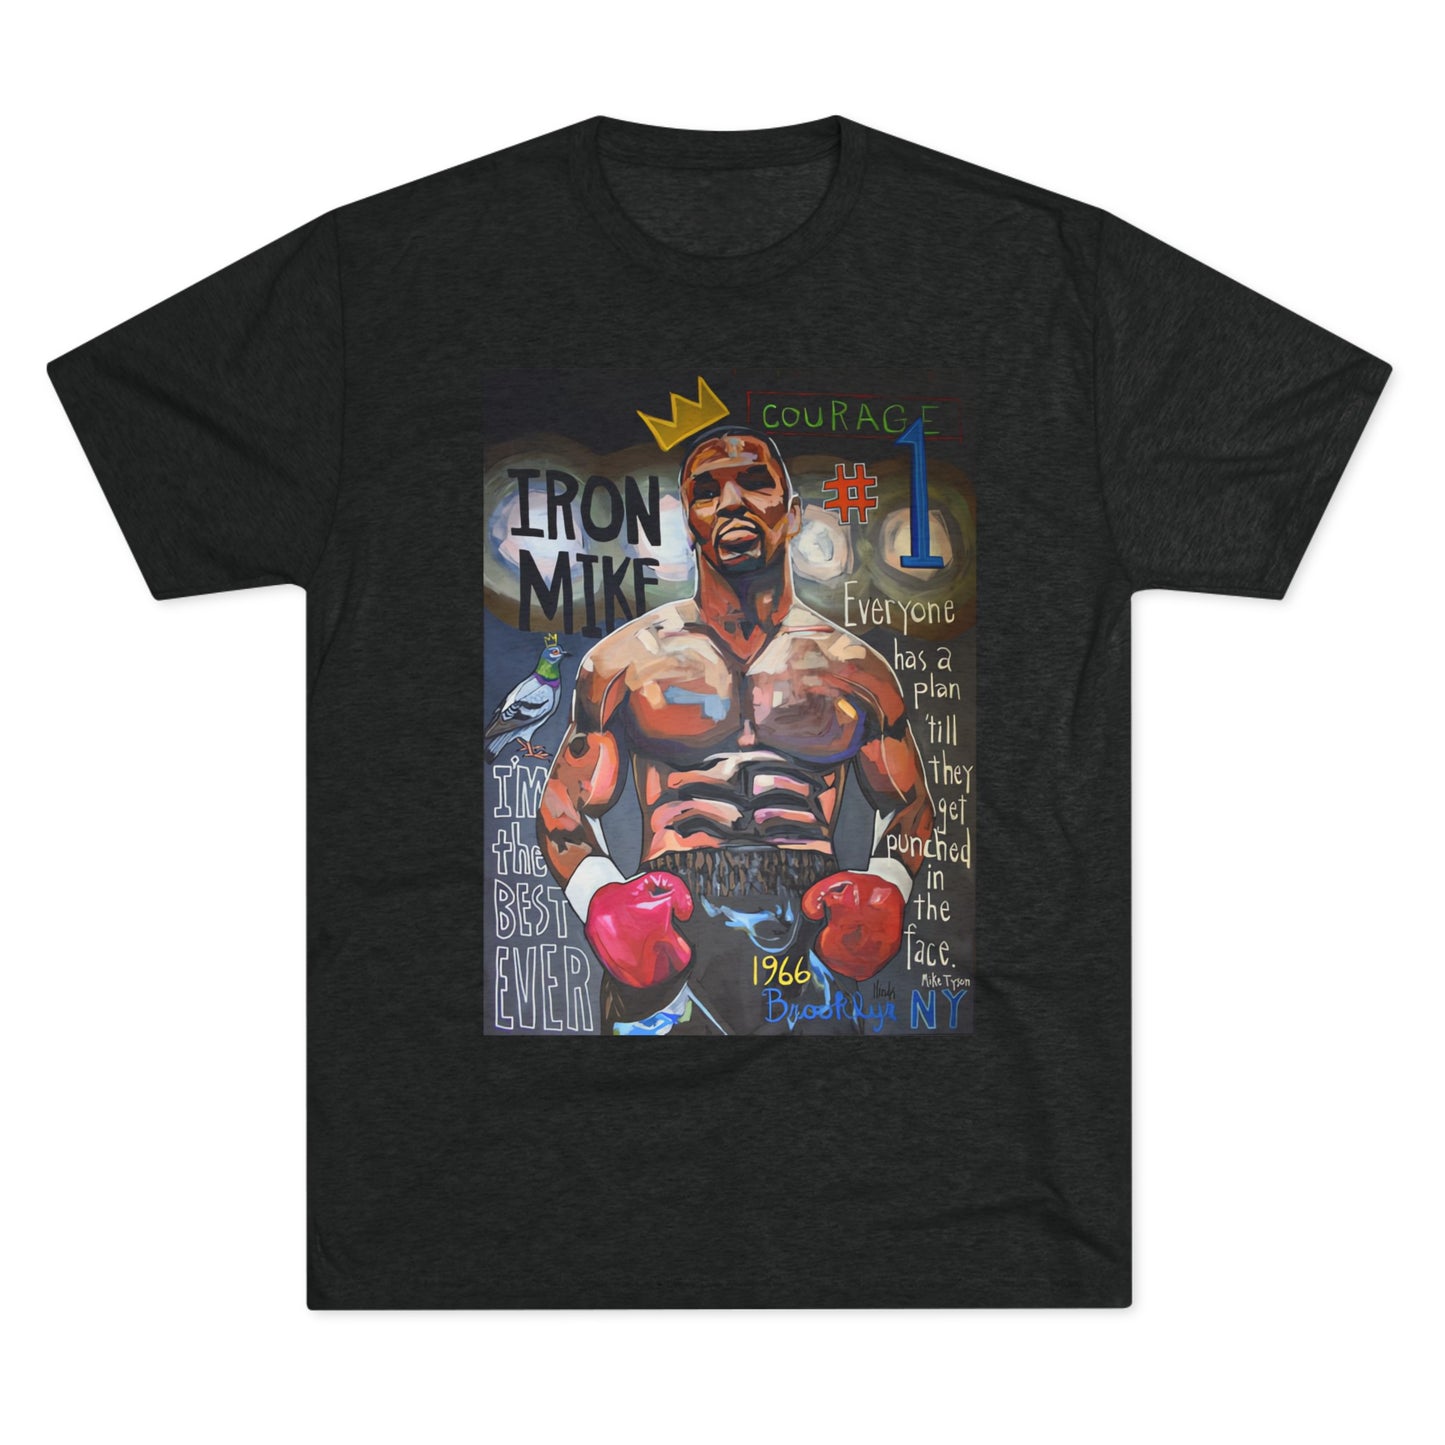 Iron Mike - Legendary Boxer Tribute Tri-Blend T-Shirt - Ultra-Soft, Iconic Fighter Inspired Design